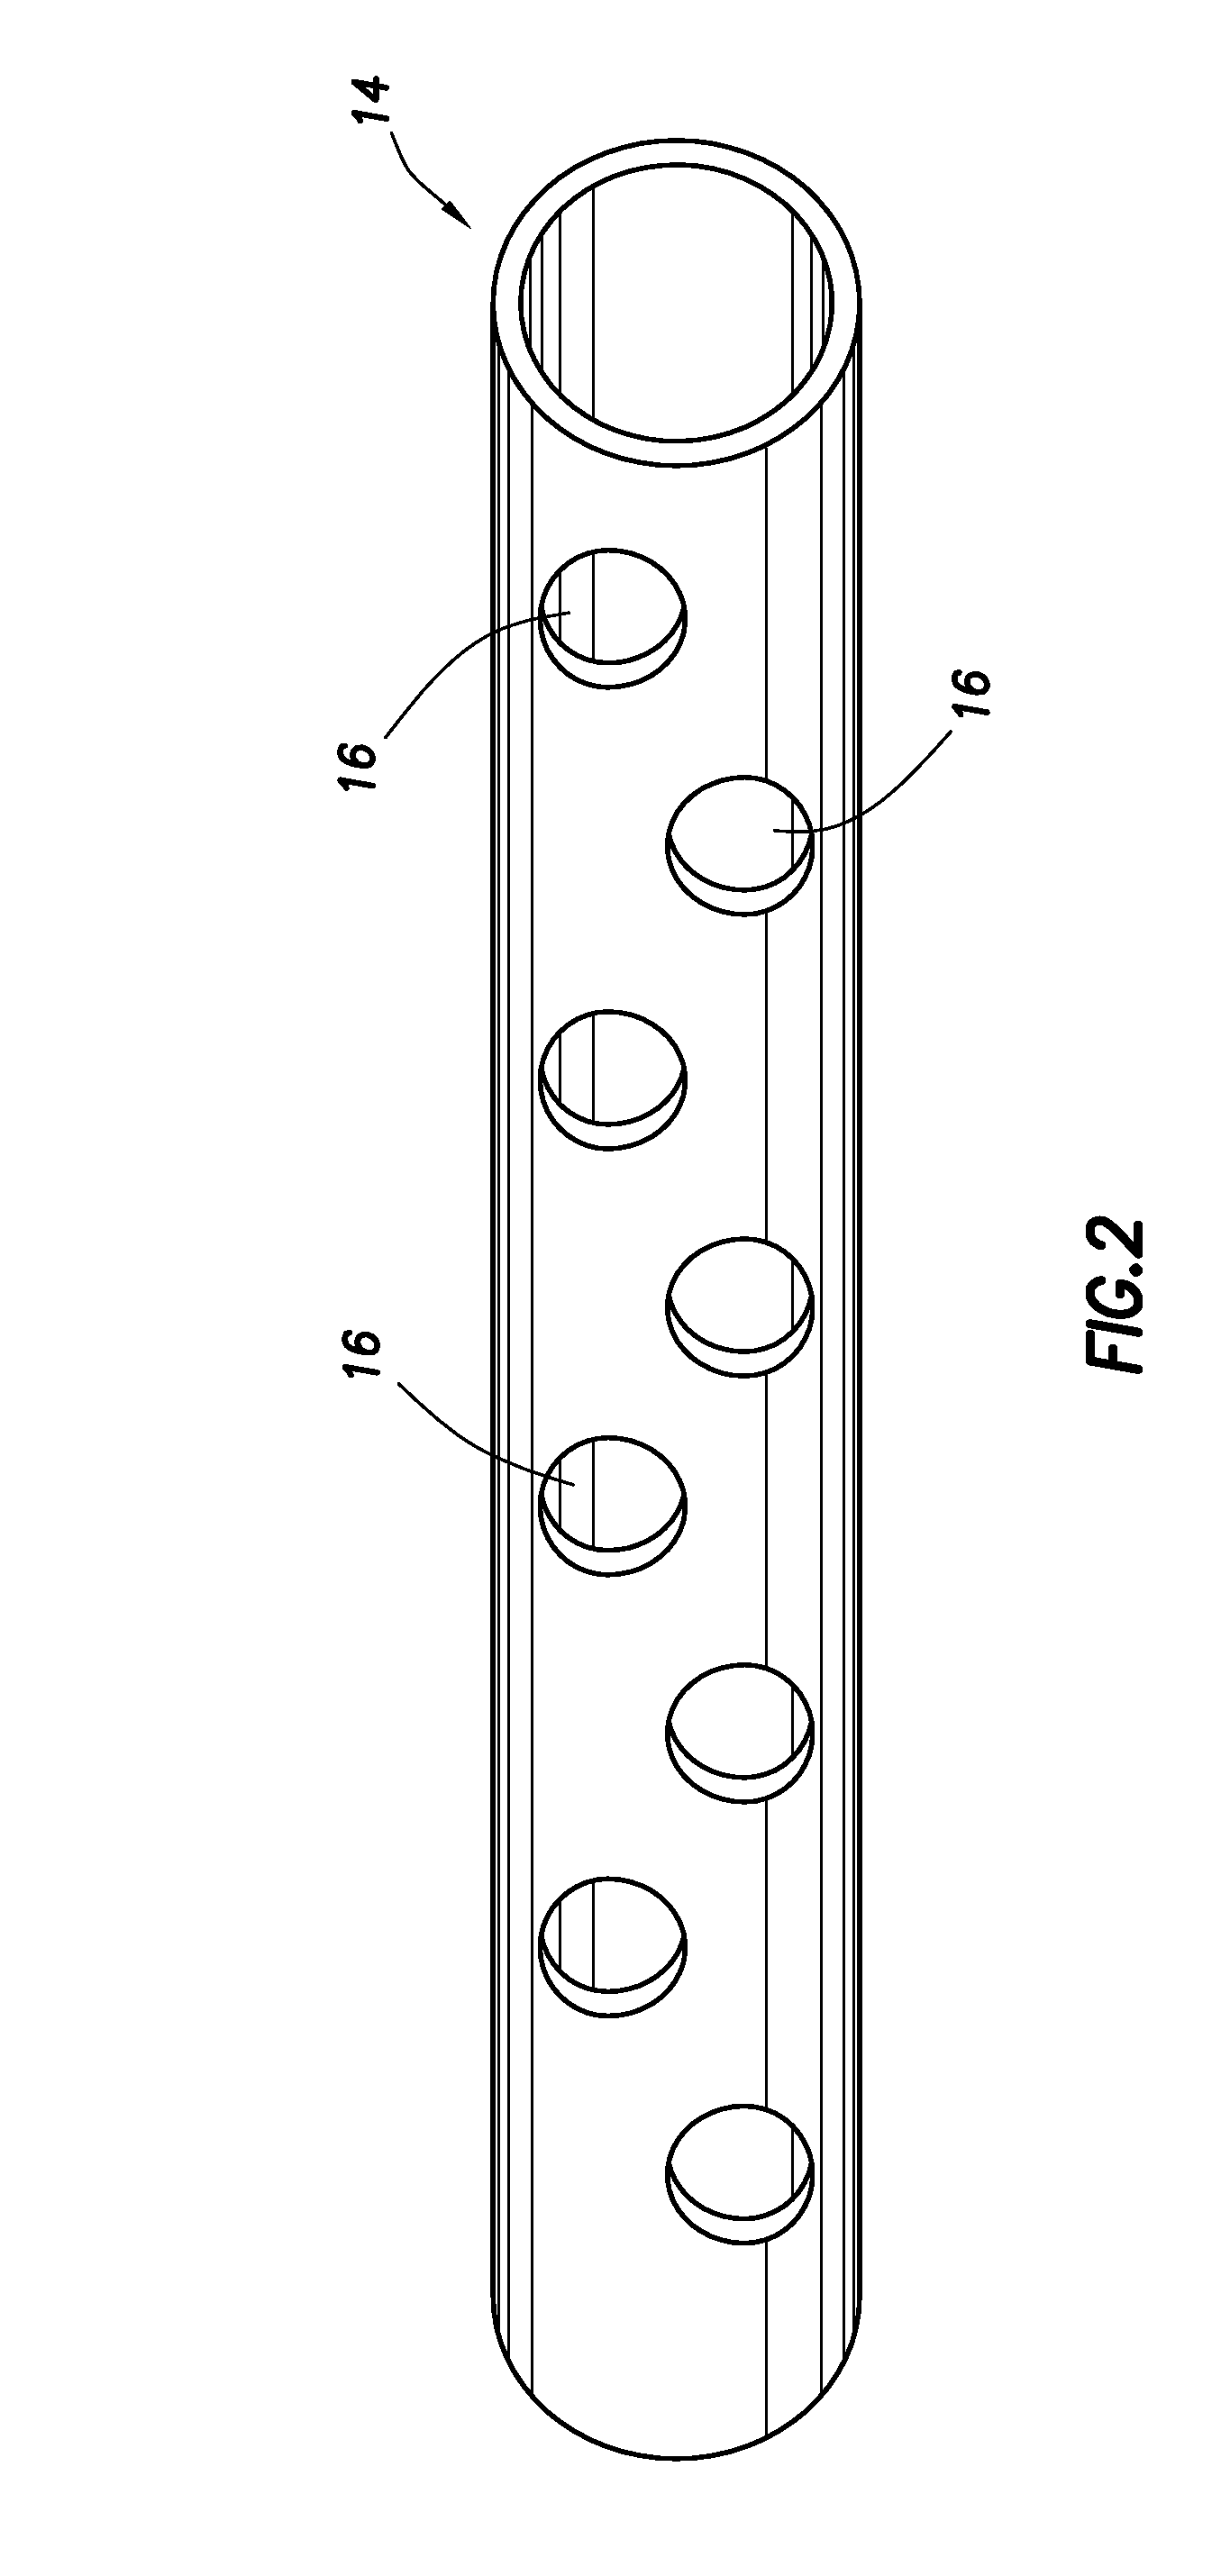 Method and apparatus for expendable tubing-conveyed perforating gun